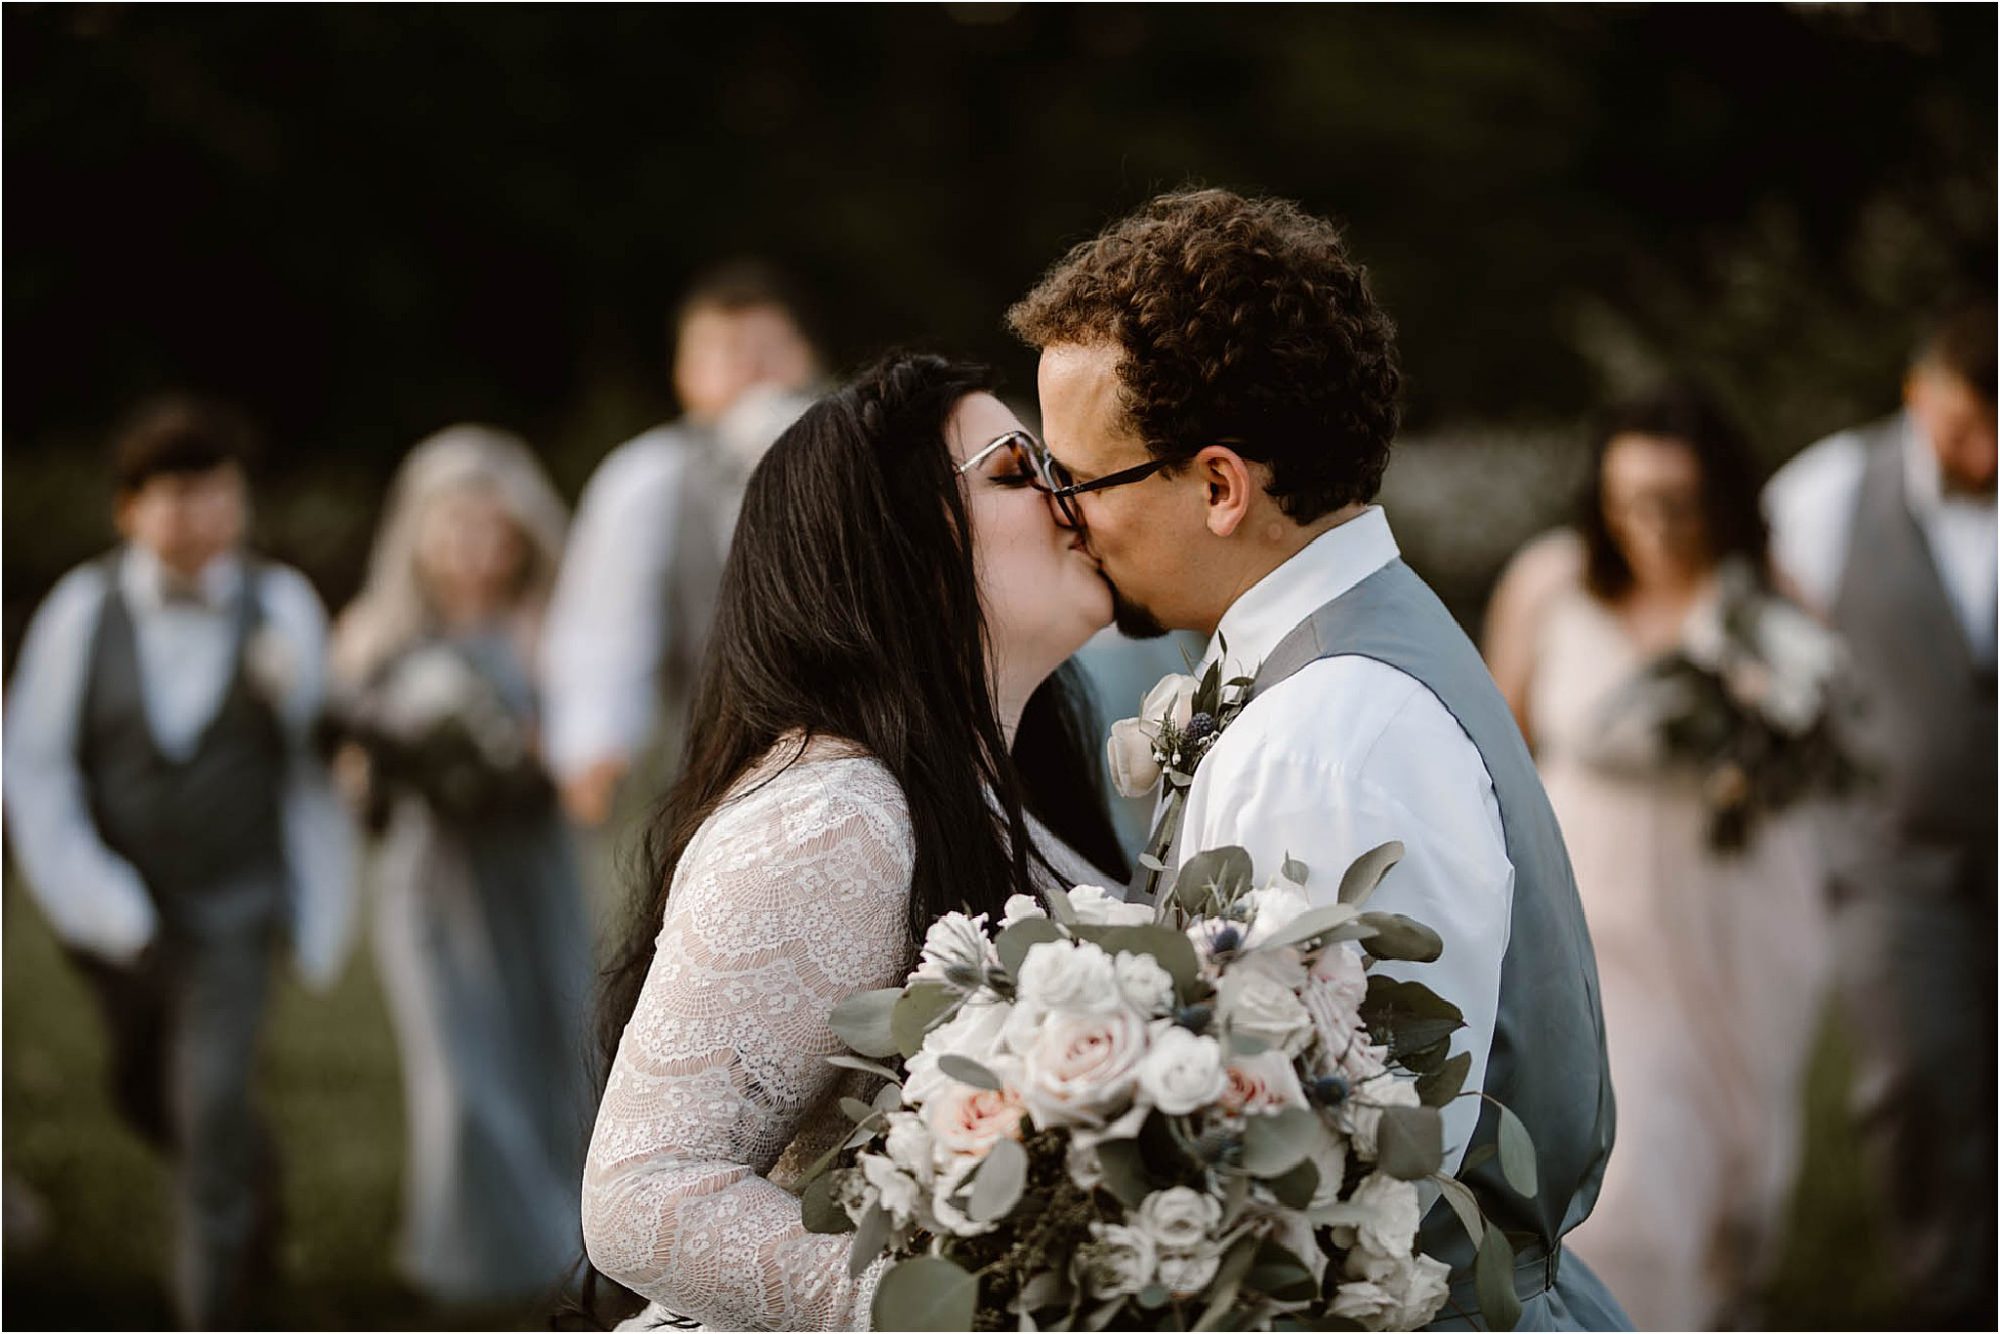 bride and groom kissing with bridesmaids and groomsmen in background